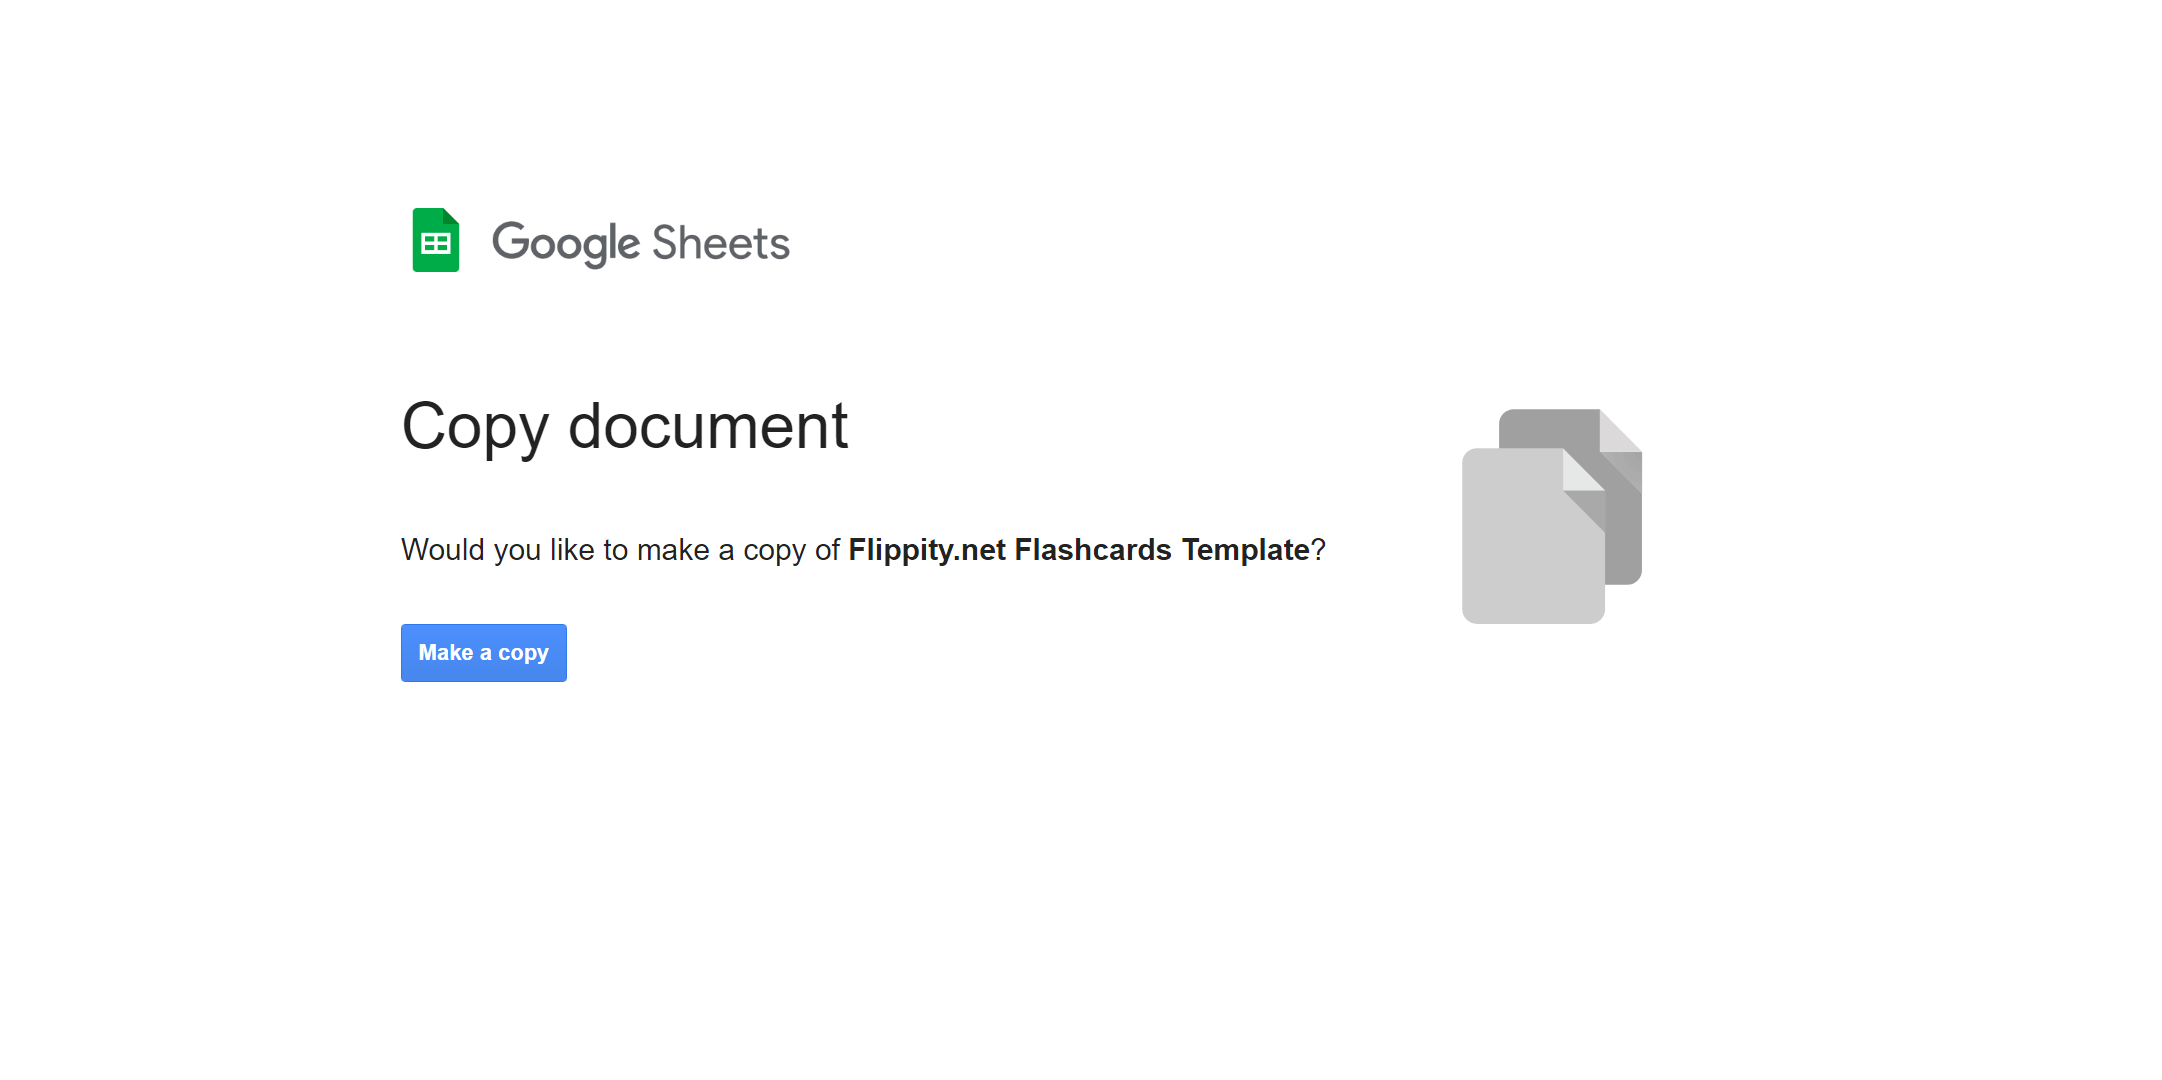 Copy the template to start Creating flashcards in Google Sheets